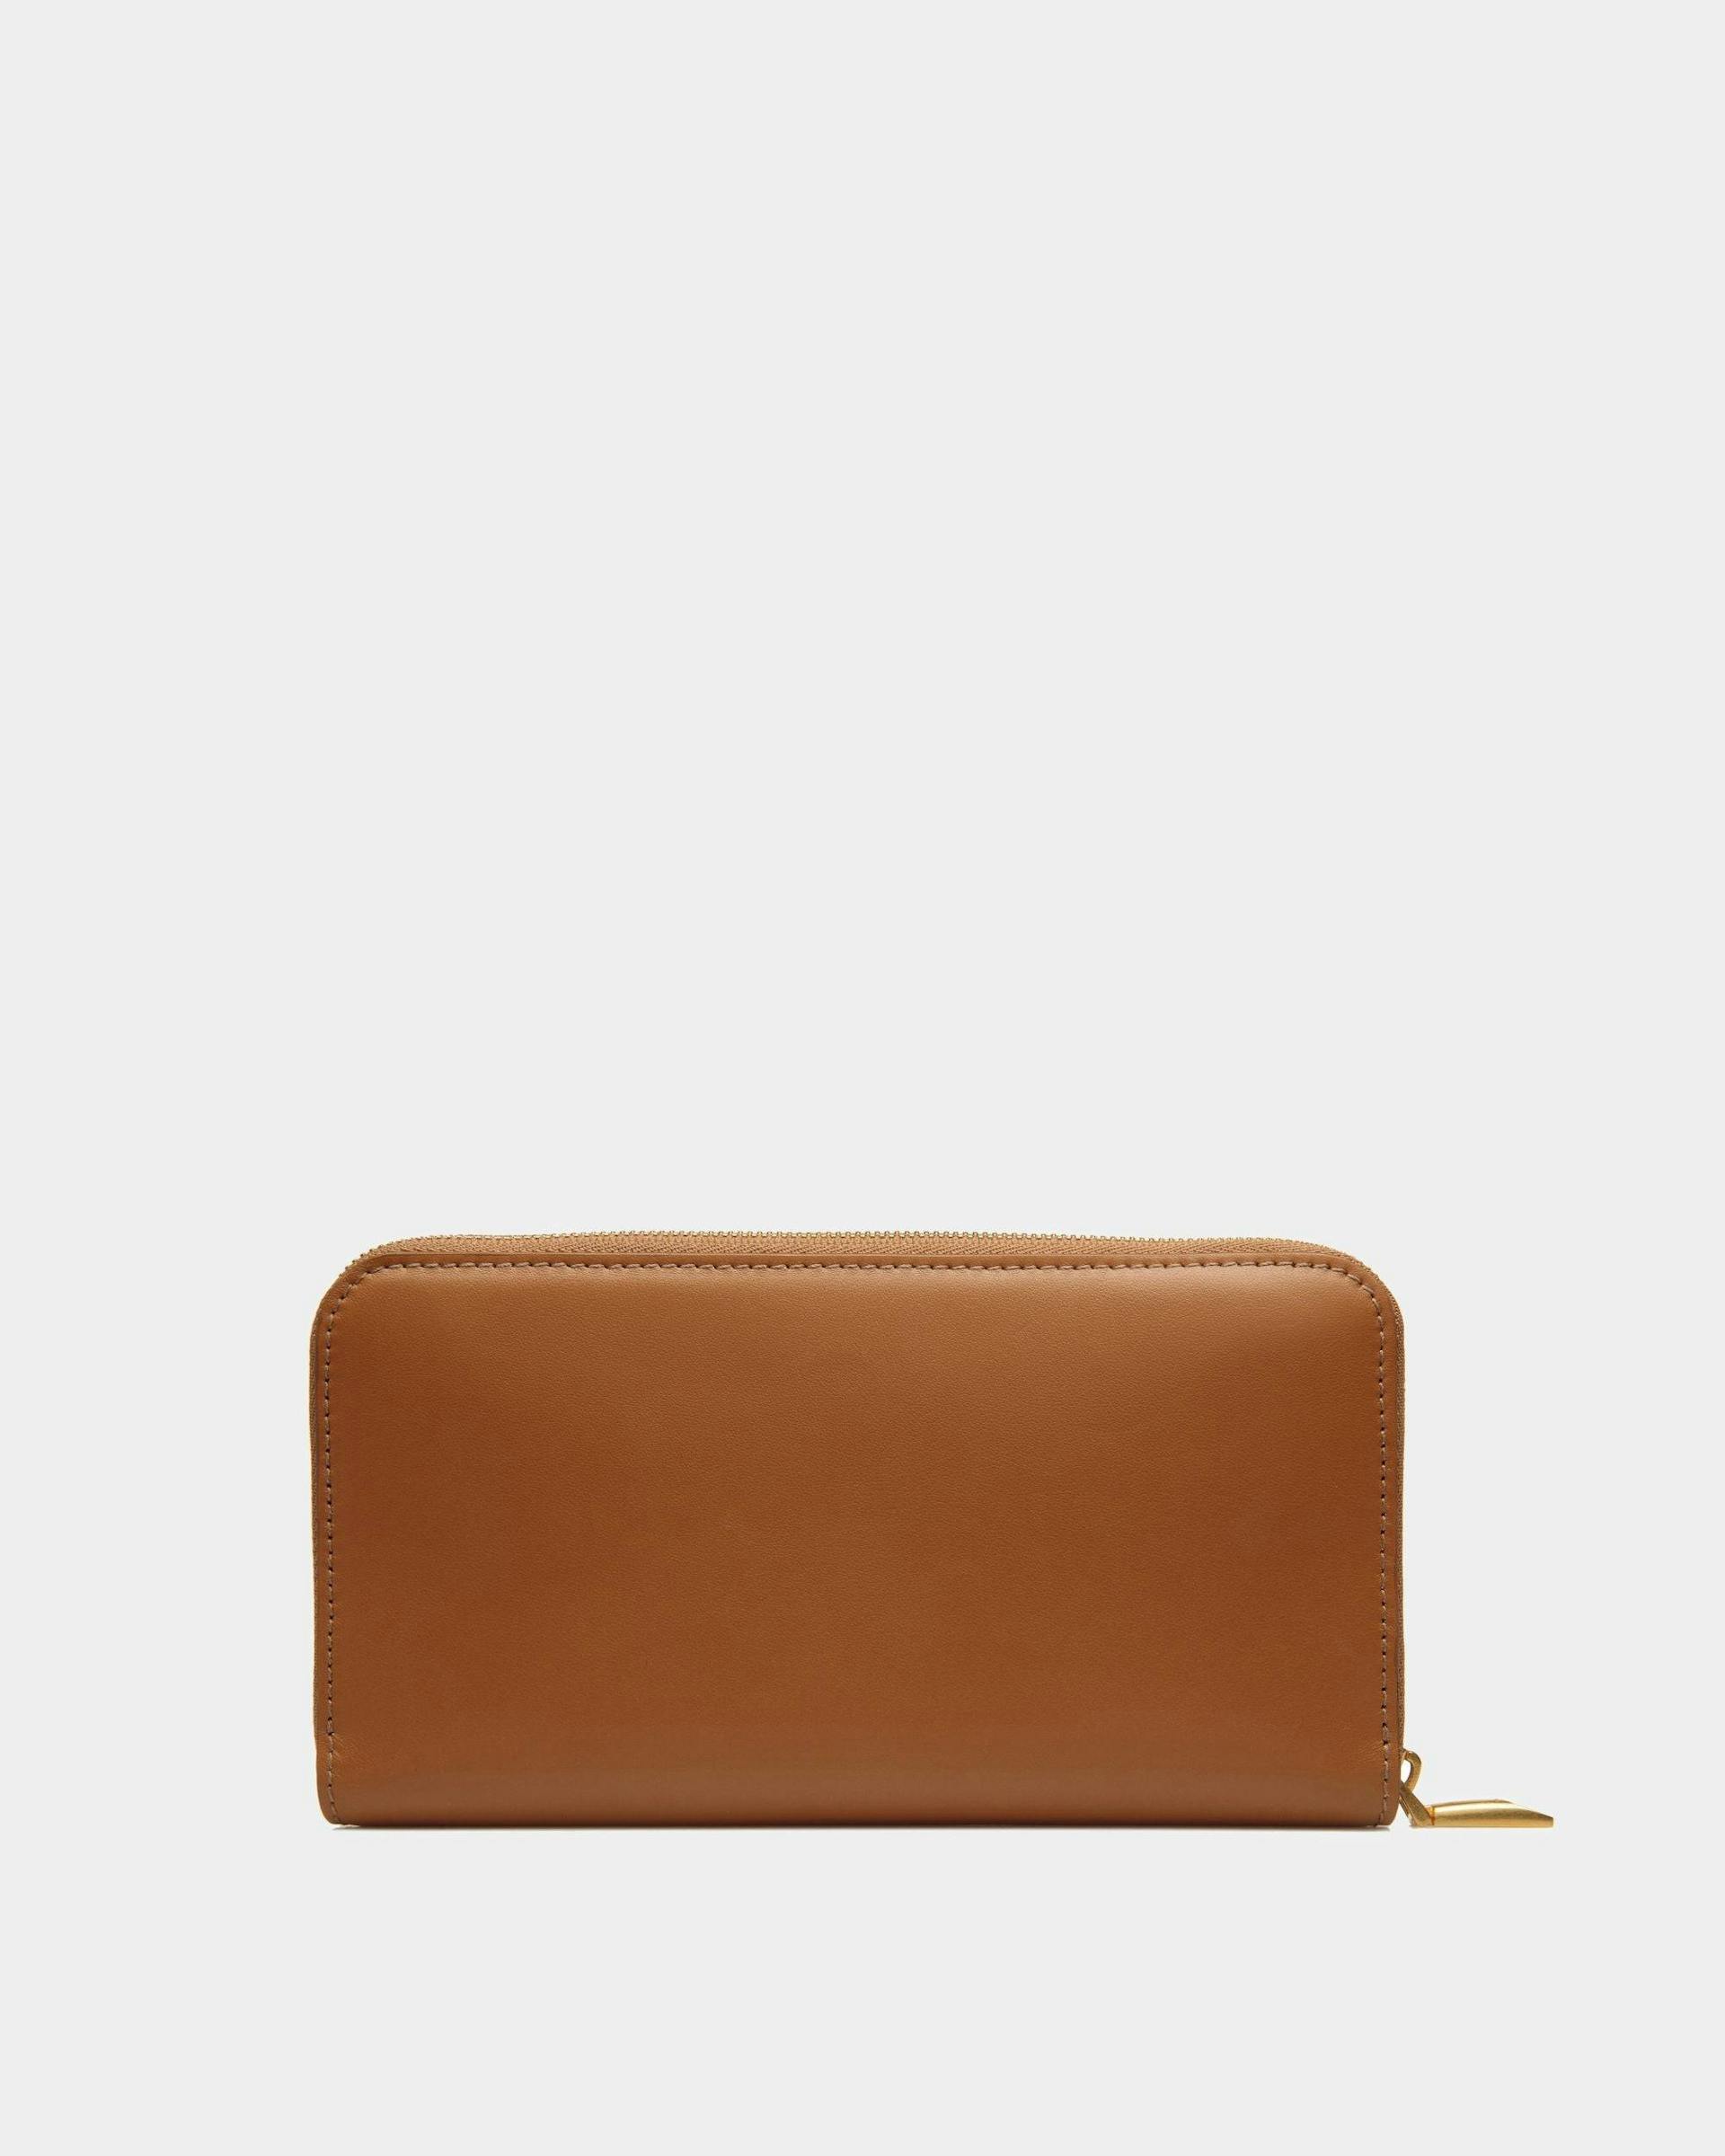 Women's Emblem Long Wallet In Brown Leather | Bally | Still Life Back